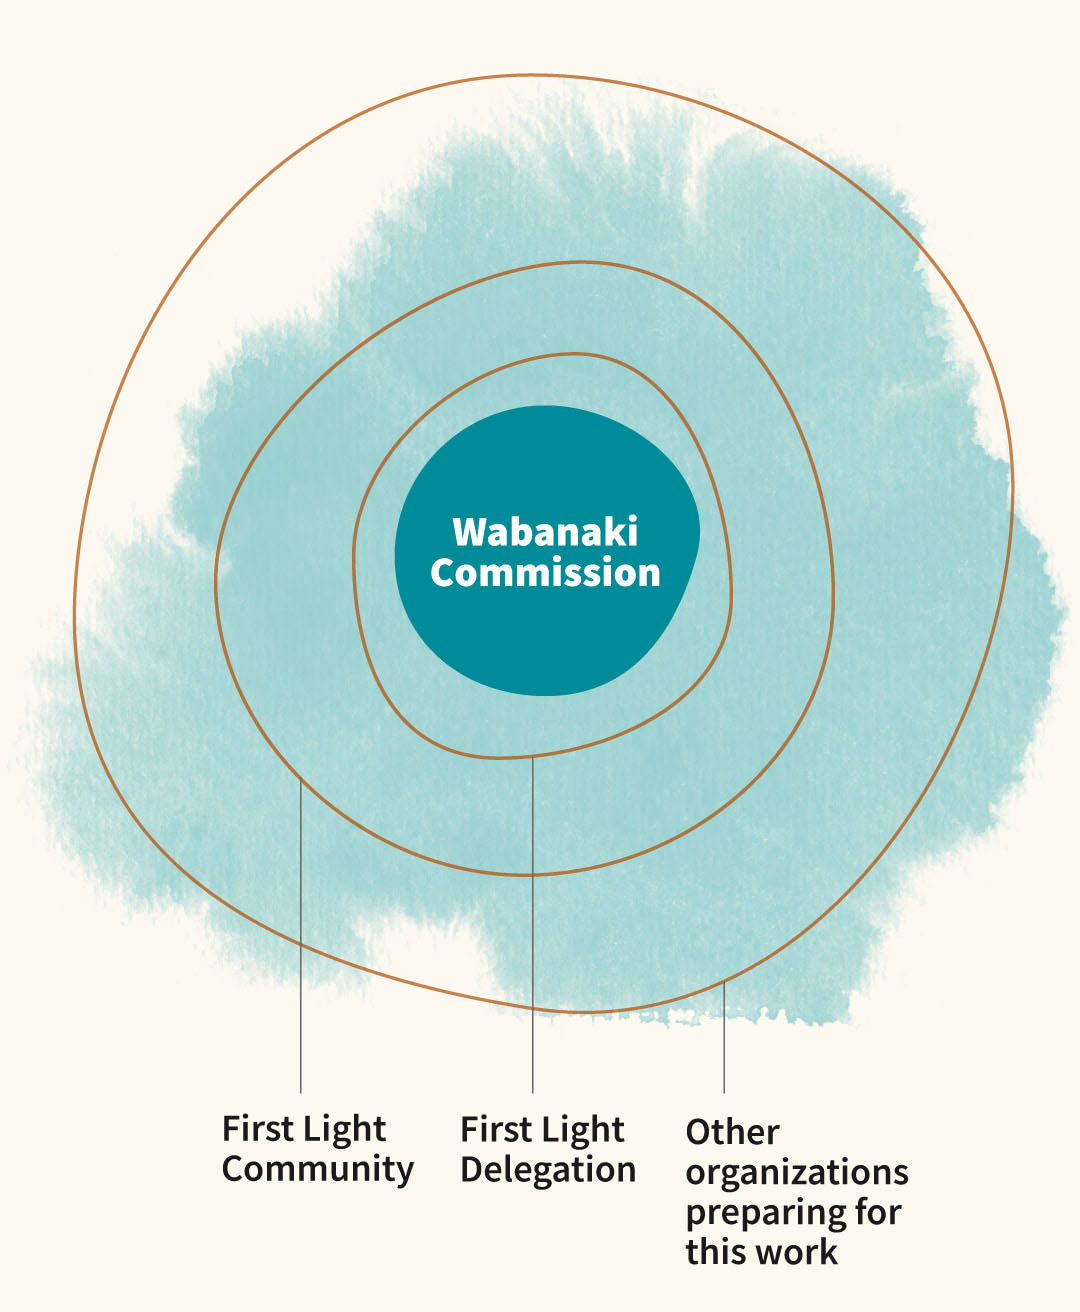 First Light organization chart: Wabanaki Commission in the center, then First Light Community in next outer layer, followed by First Light Delegation, and with other organizations preparing for this work in the outermost ring